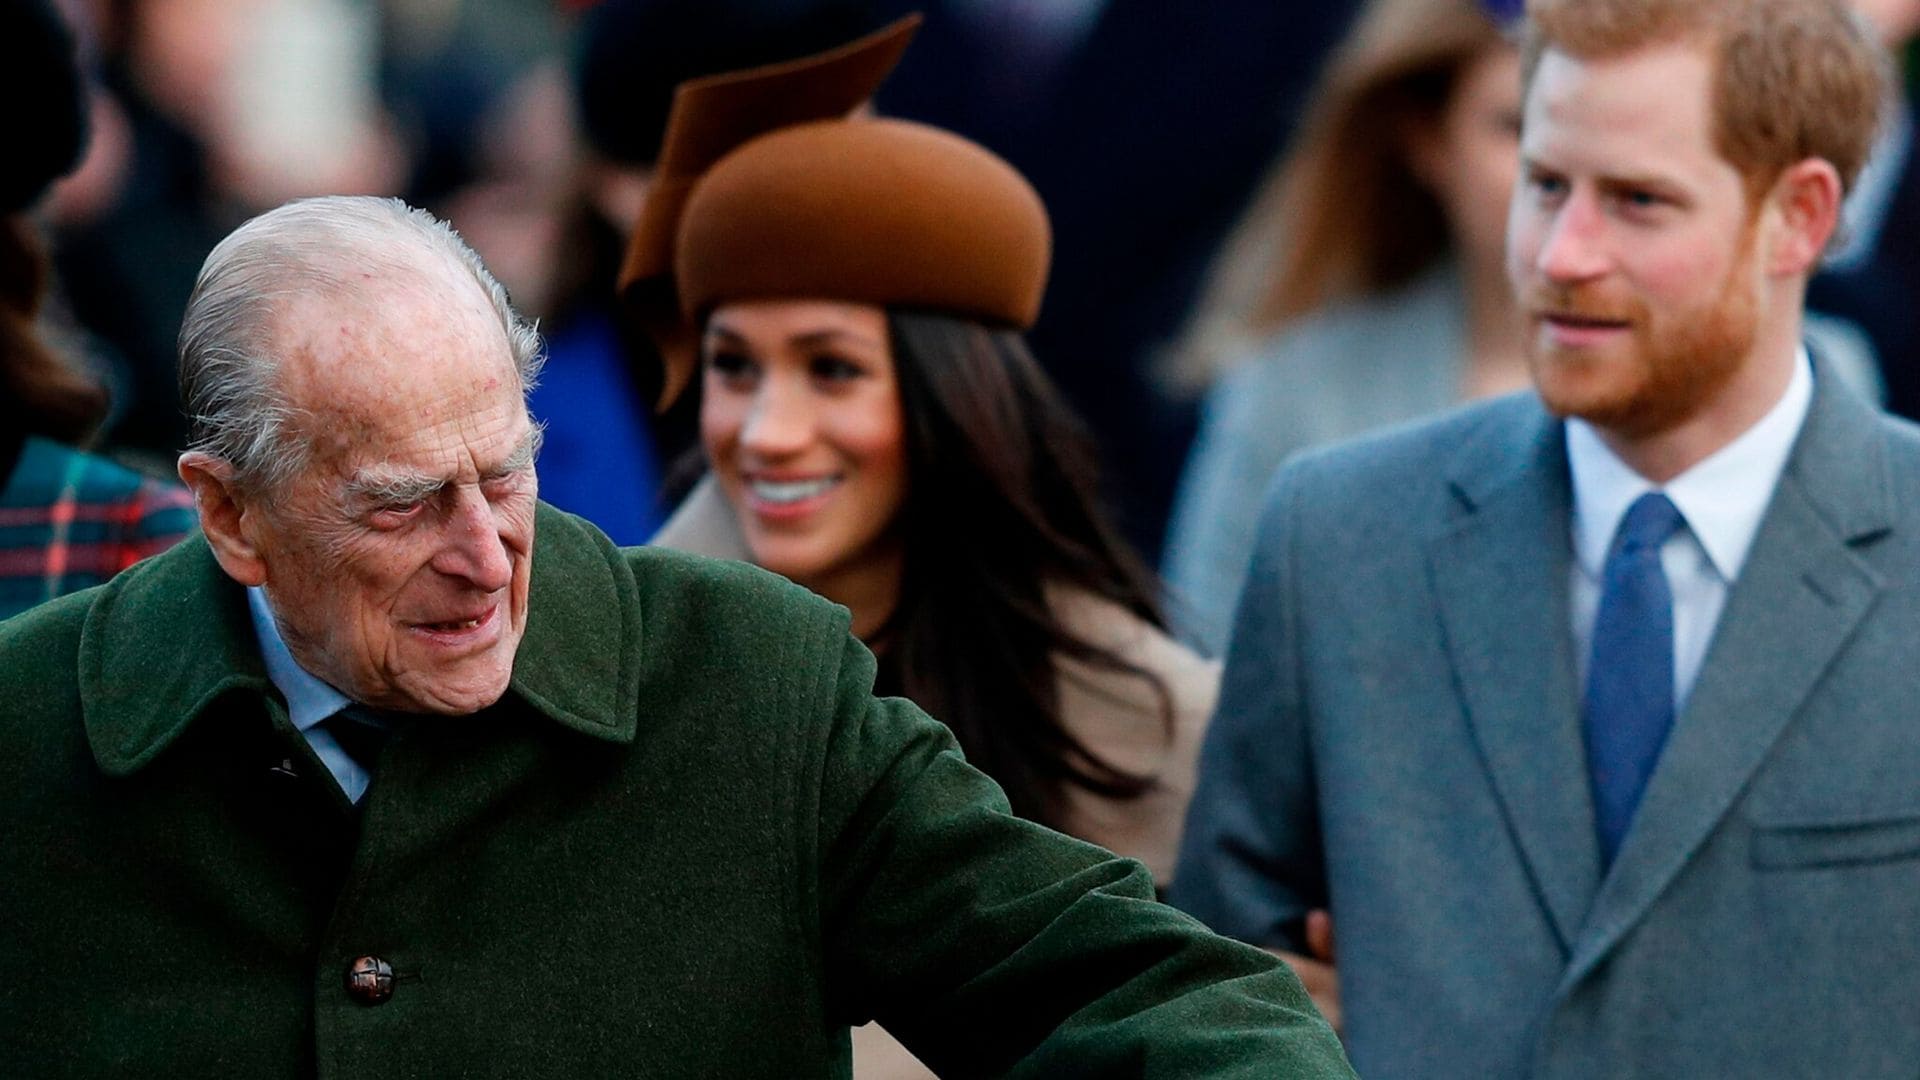 meghan markle and prince harry pay tribute to prince philip following his death